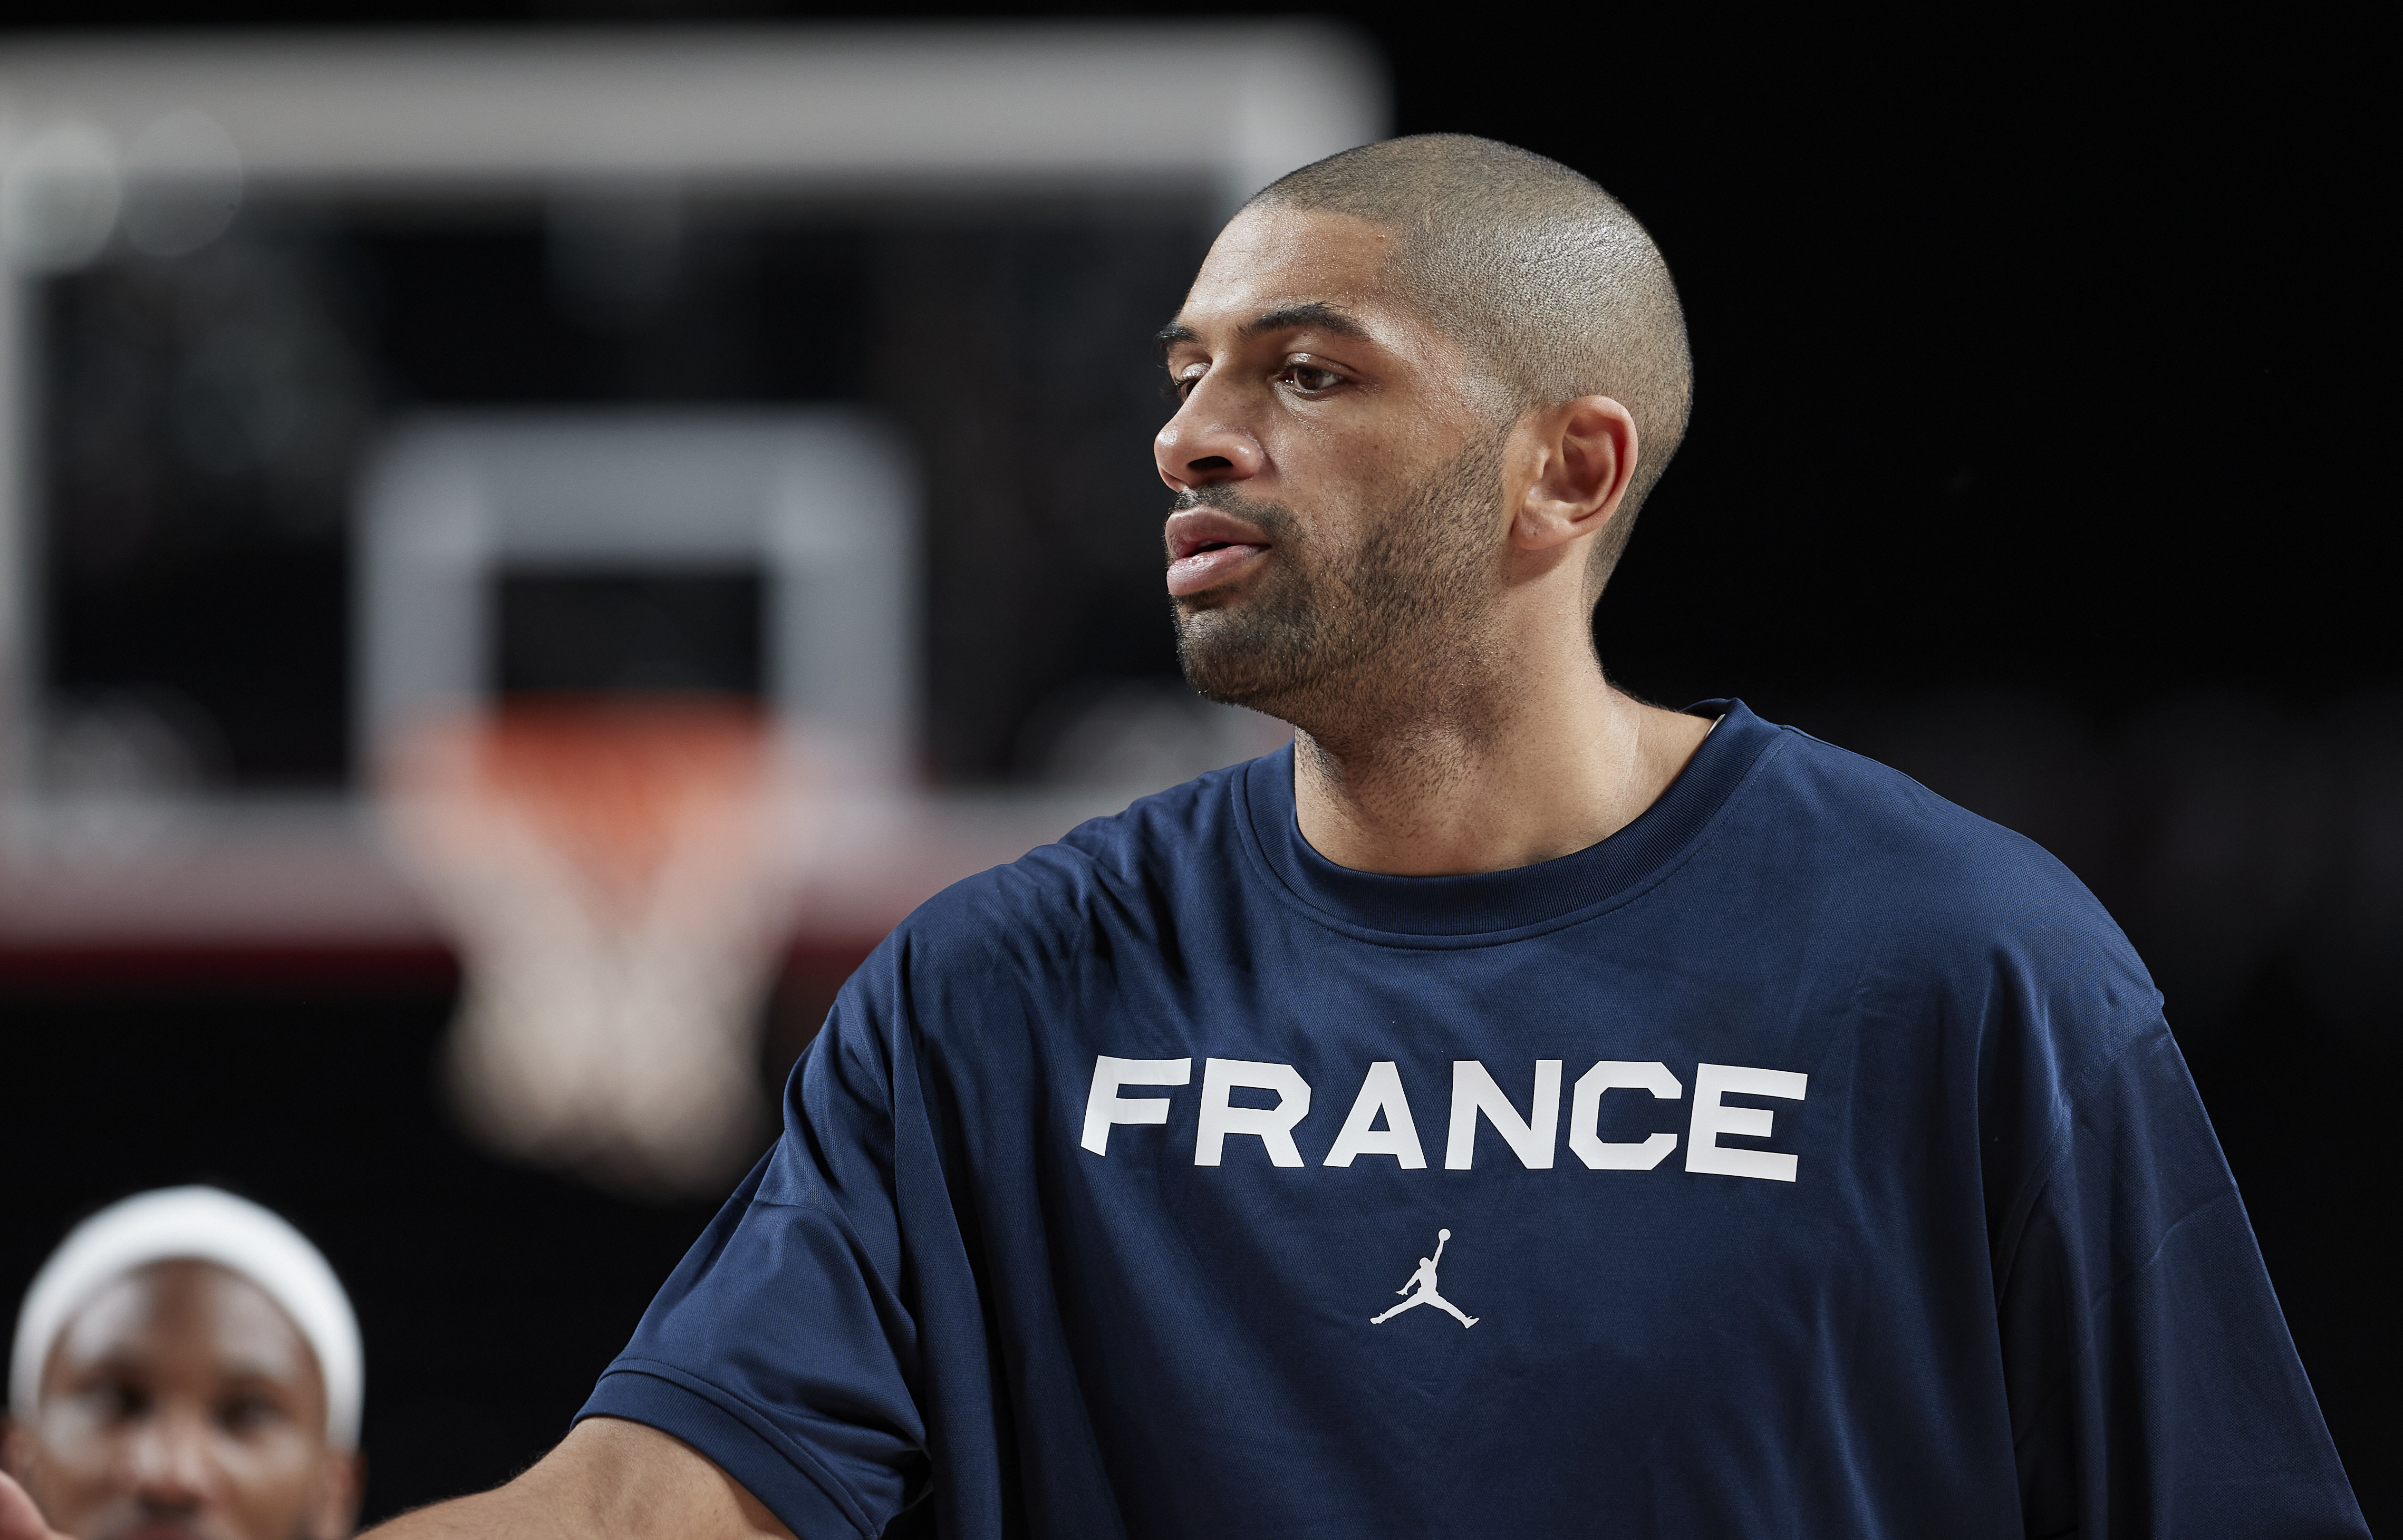 Basketball - France v USA - Men’s First Round Group A - Day 2